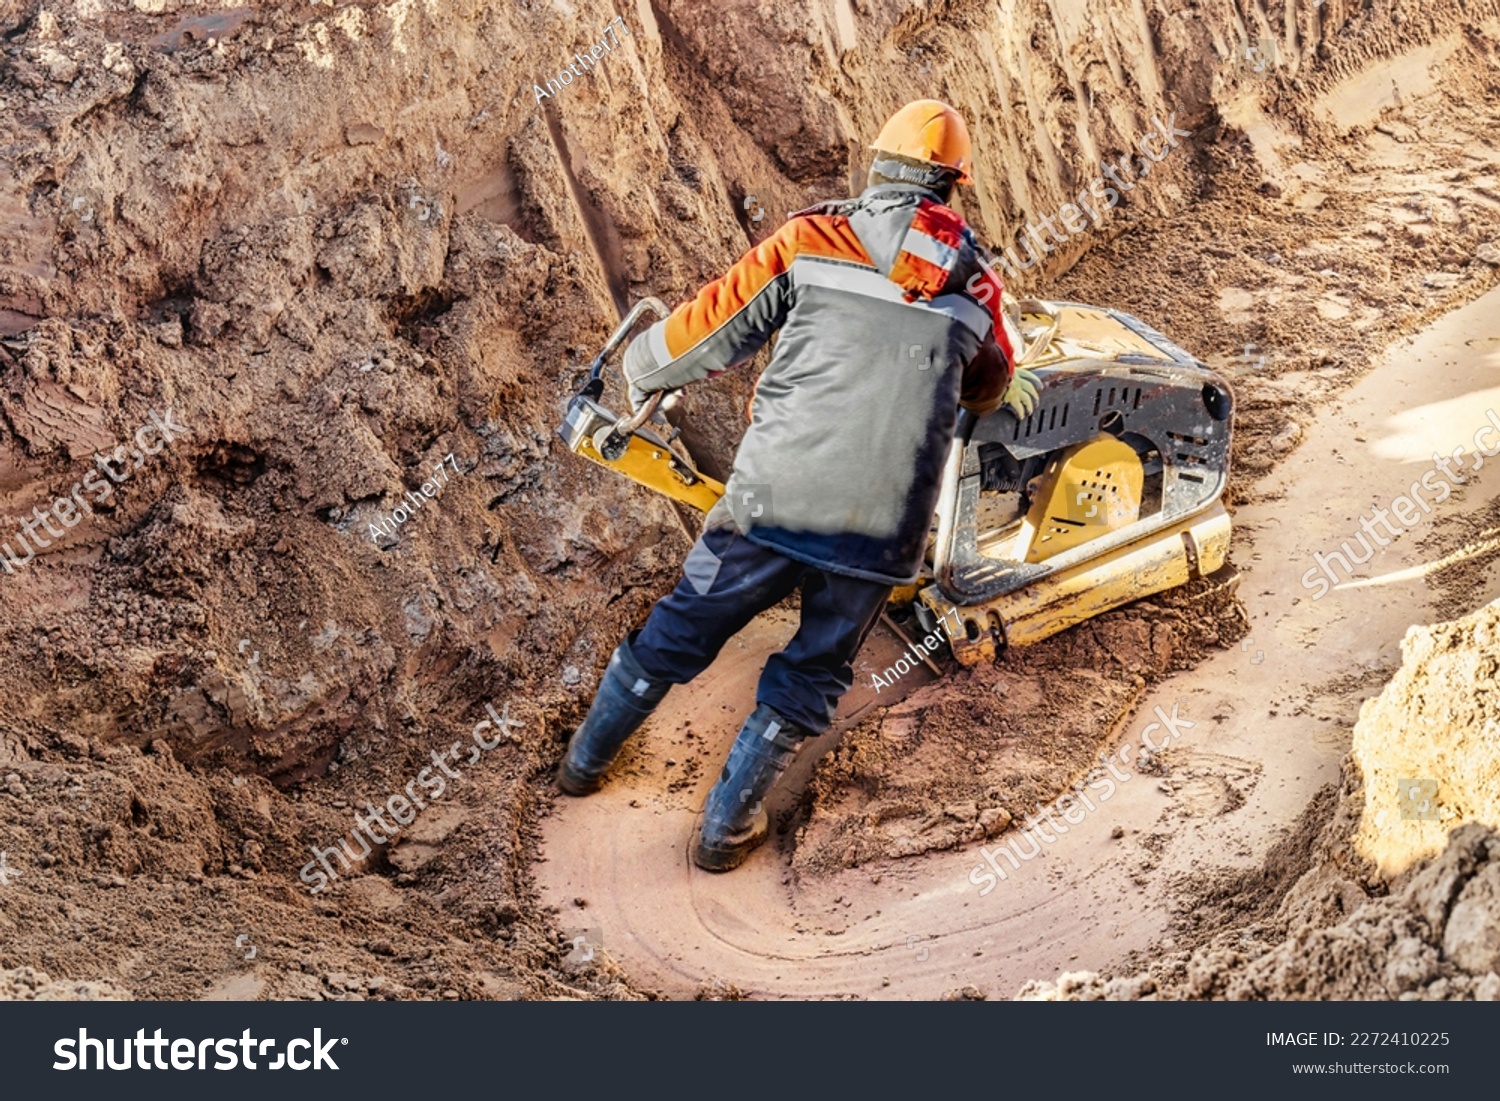 A worker compacts soil or sand with a vibrating plate in a trench at a construction site close-up. Vibratory soil compaction for laying underground utilities #2272410225